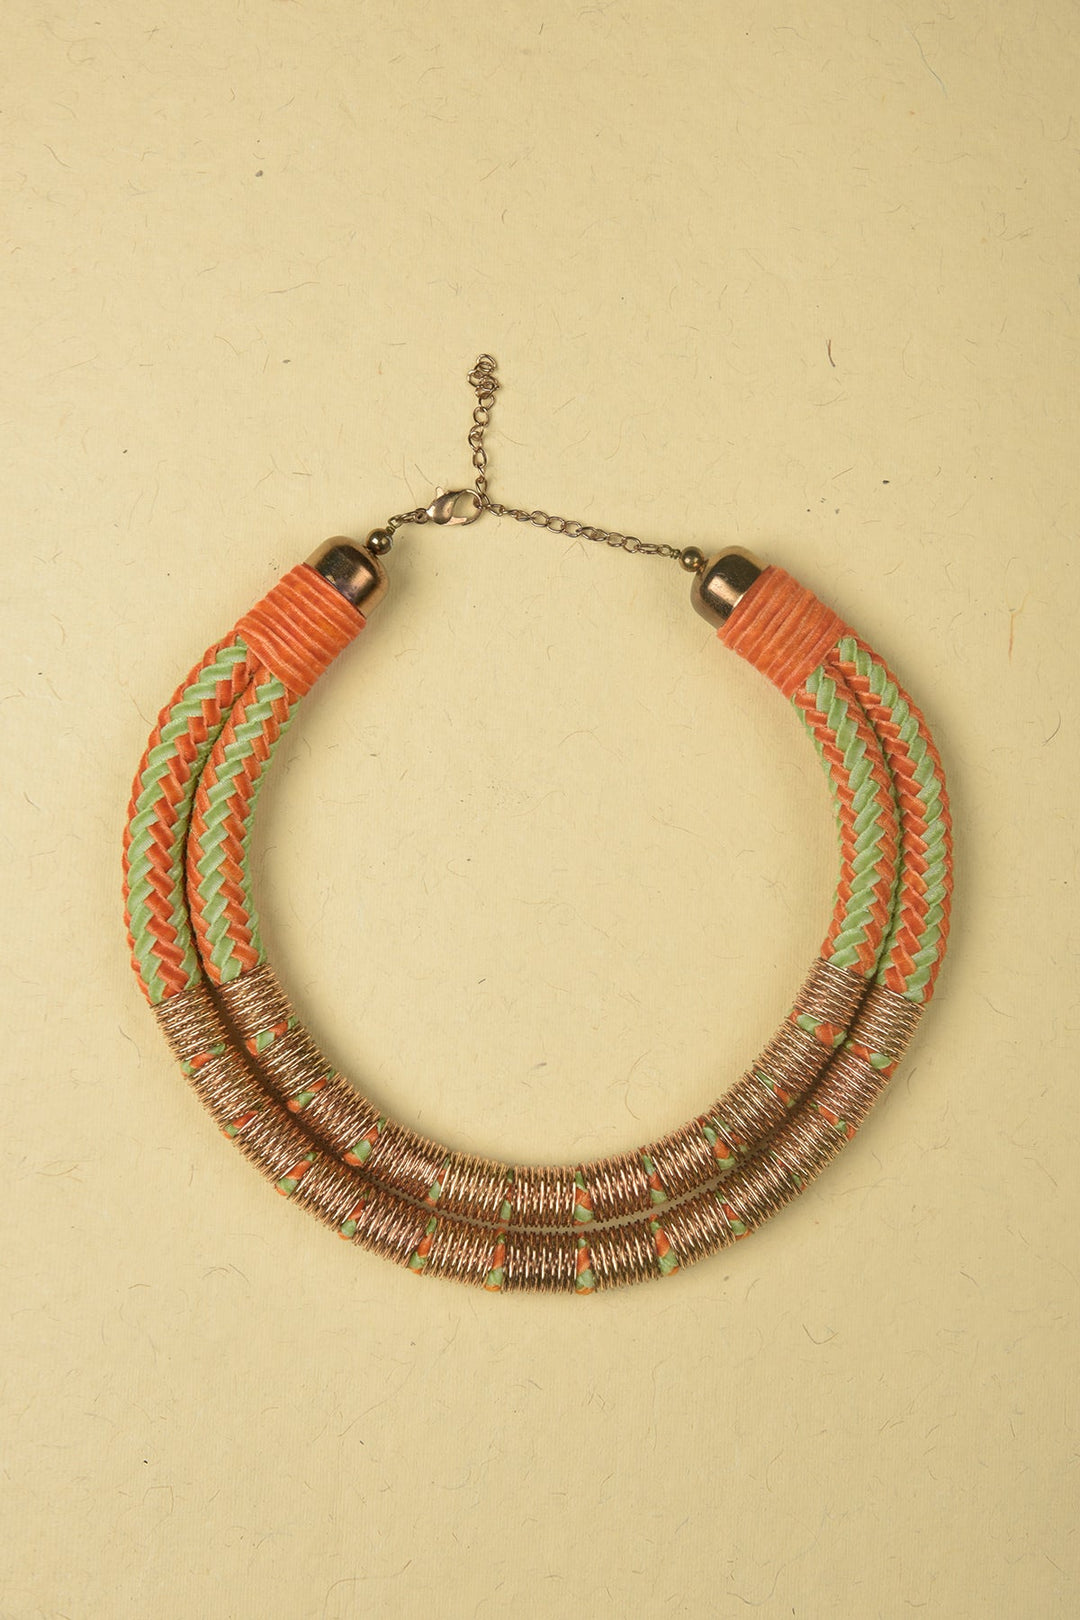 Green & Orange Necklace made of Jute, Suede and Plated Iron Rings